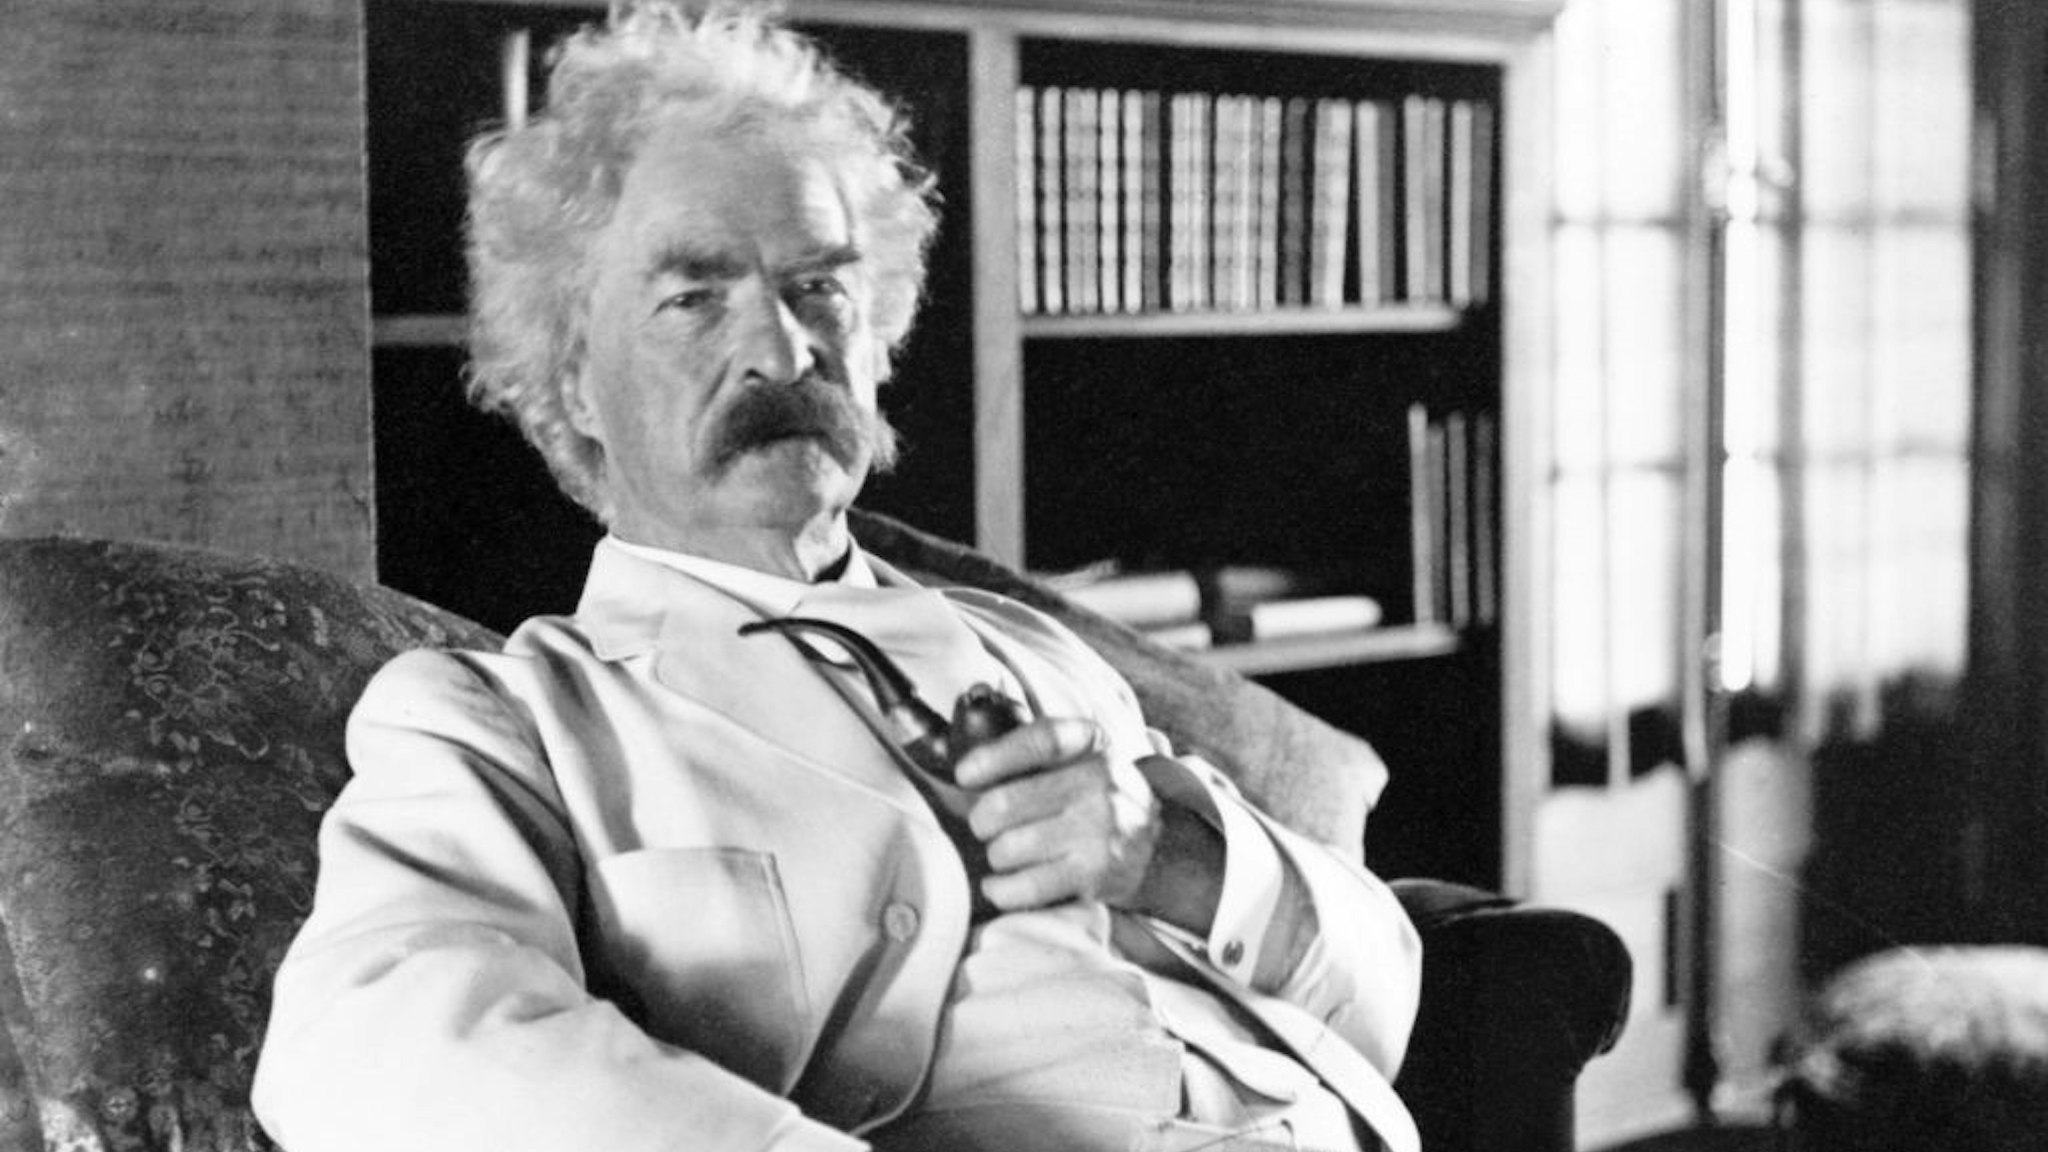 Author Mark Twain poses for a portrait in 1900. (Photo courtesty